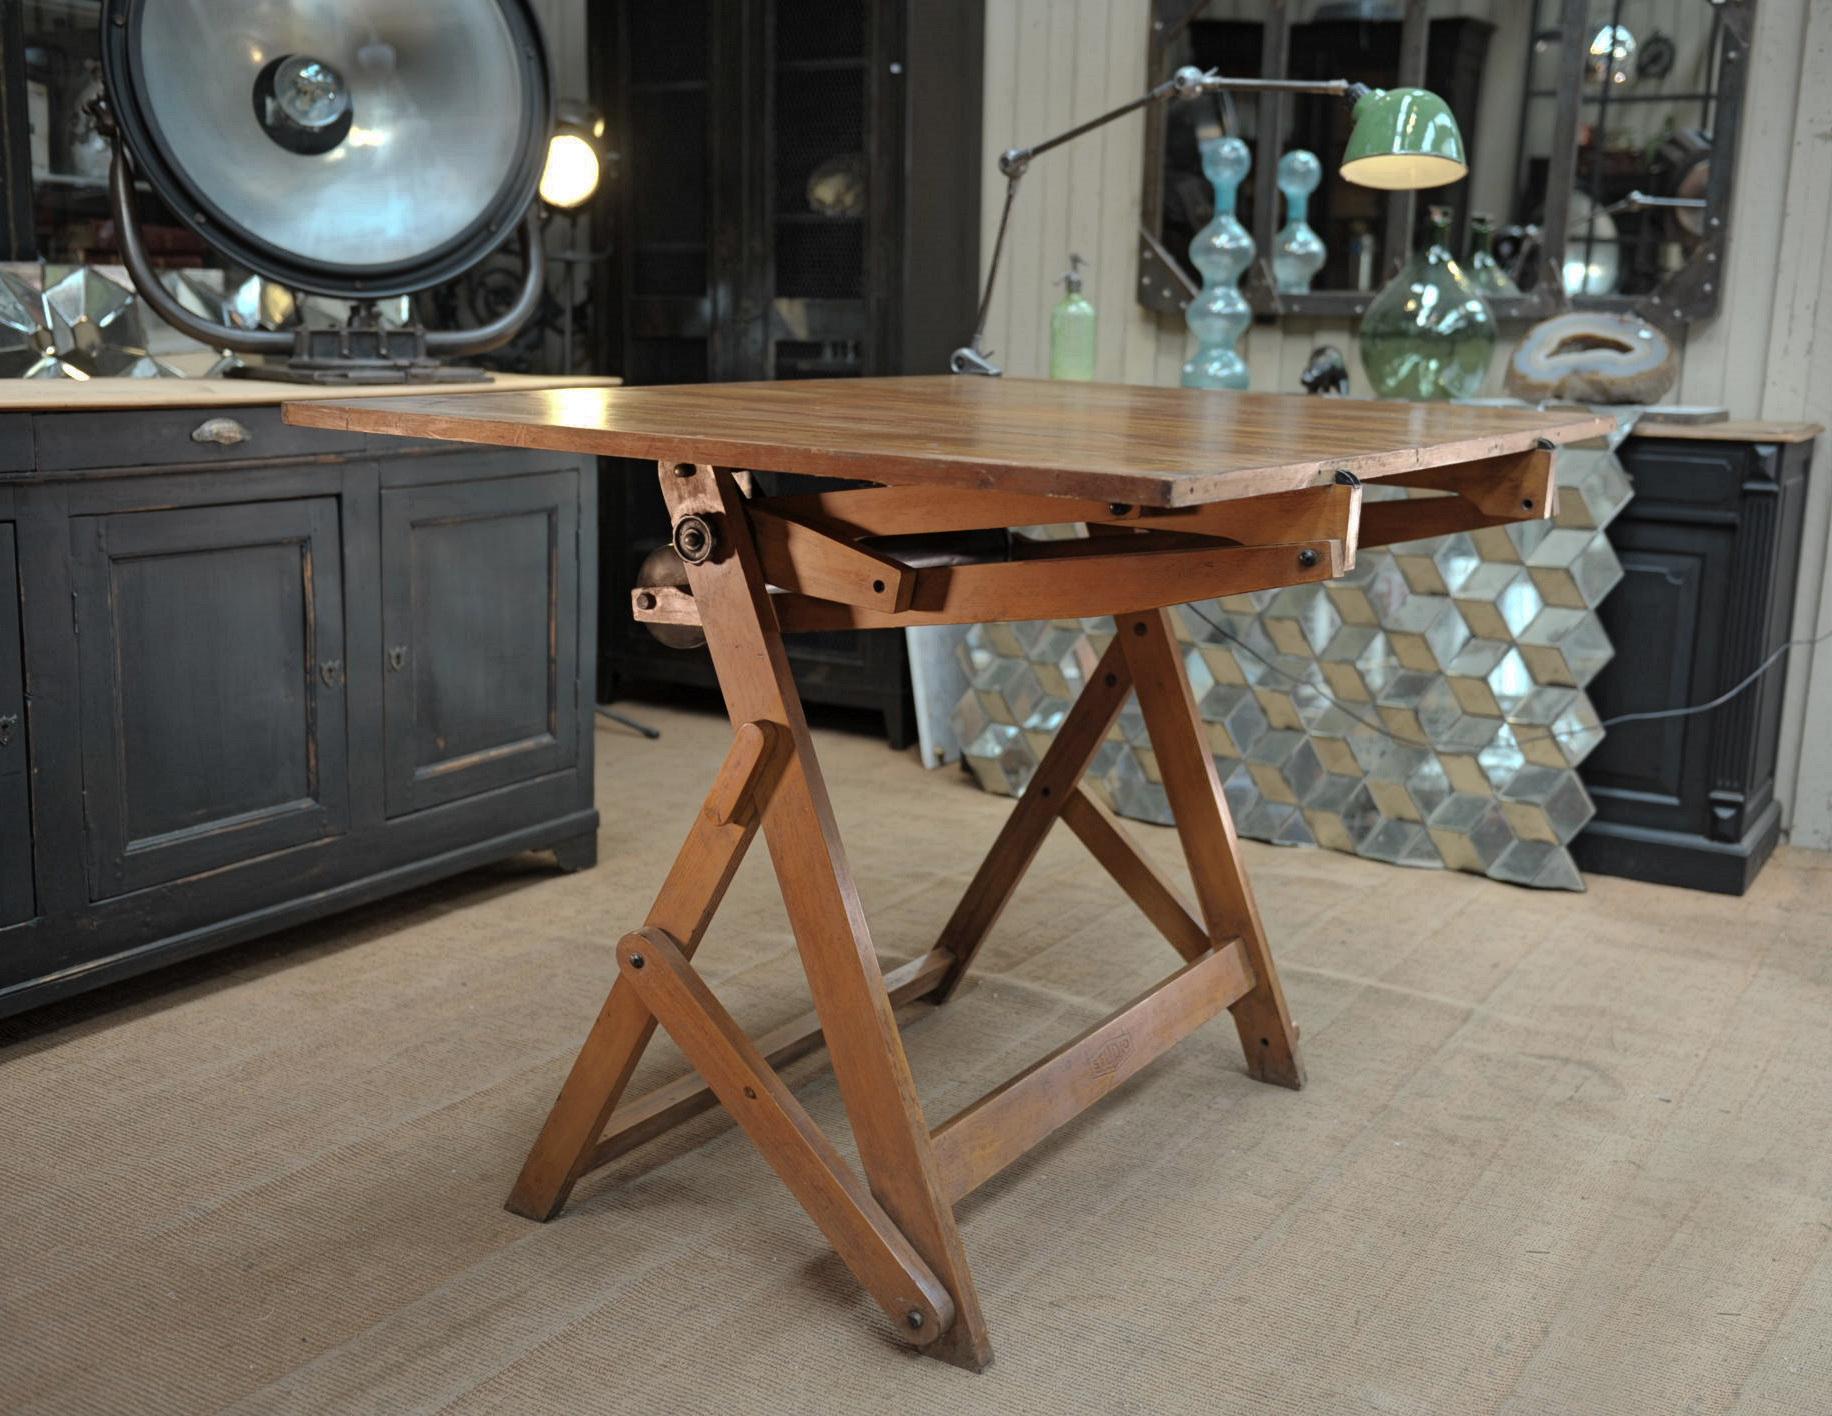 French Adjustable Architect's Drafting Table or Writing Desk, with Lamp, circa 1920s